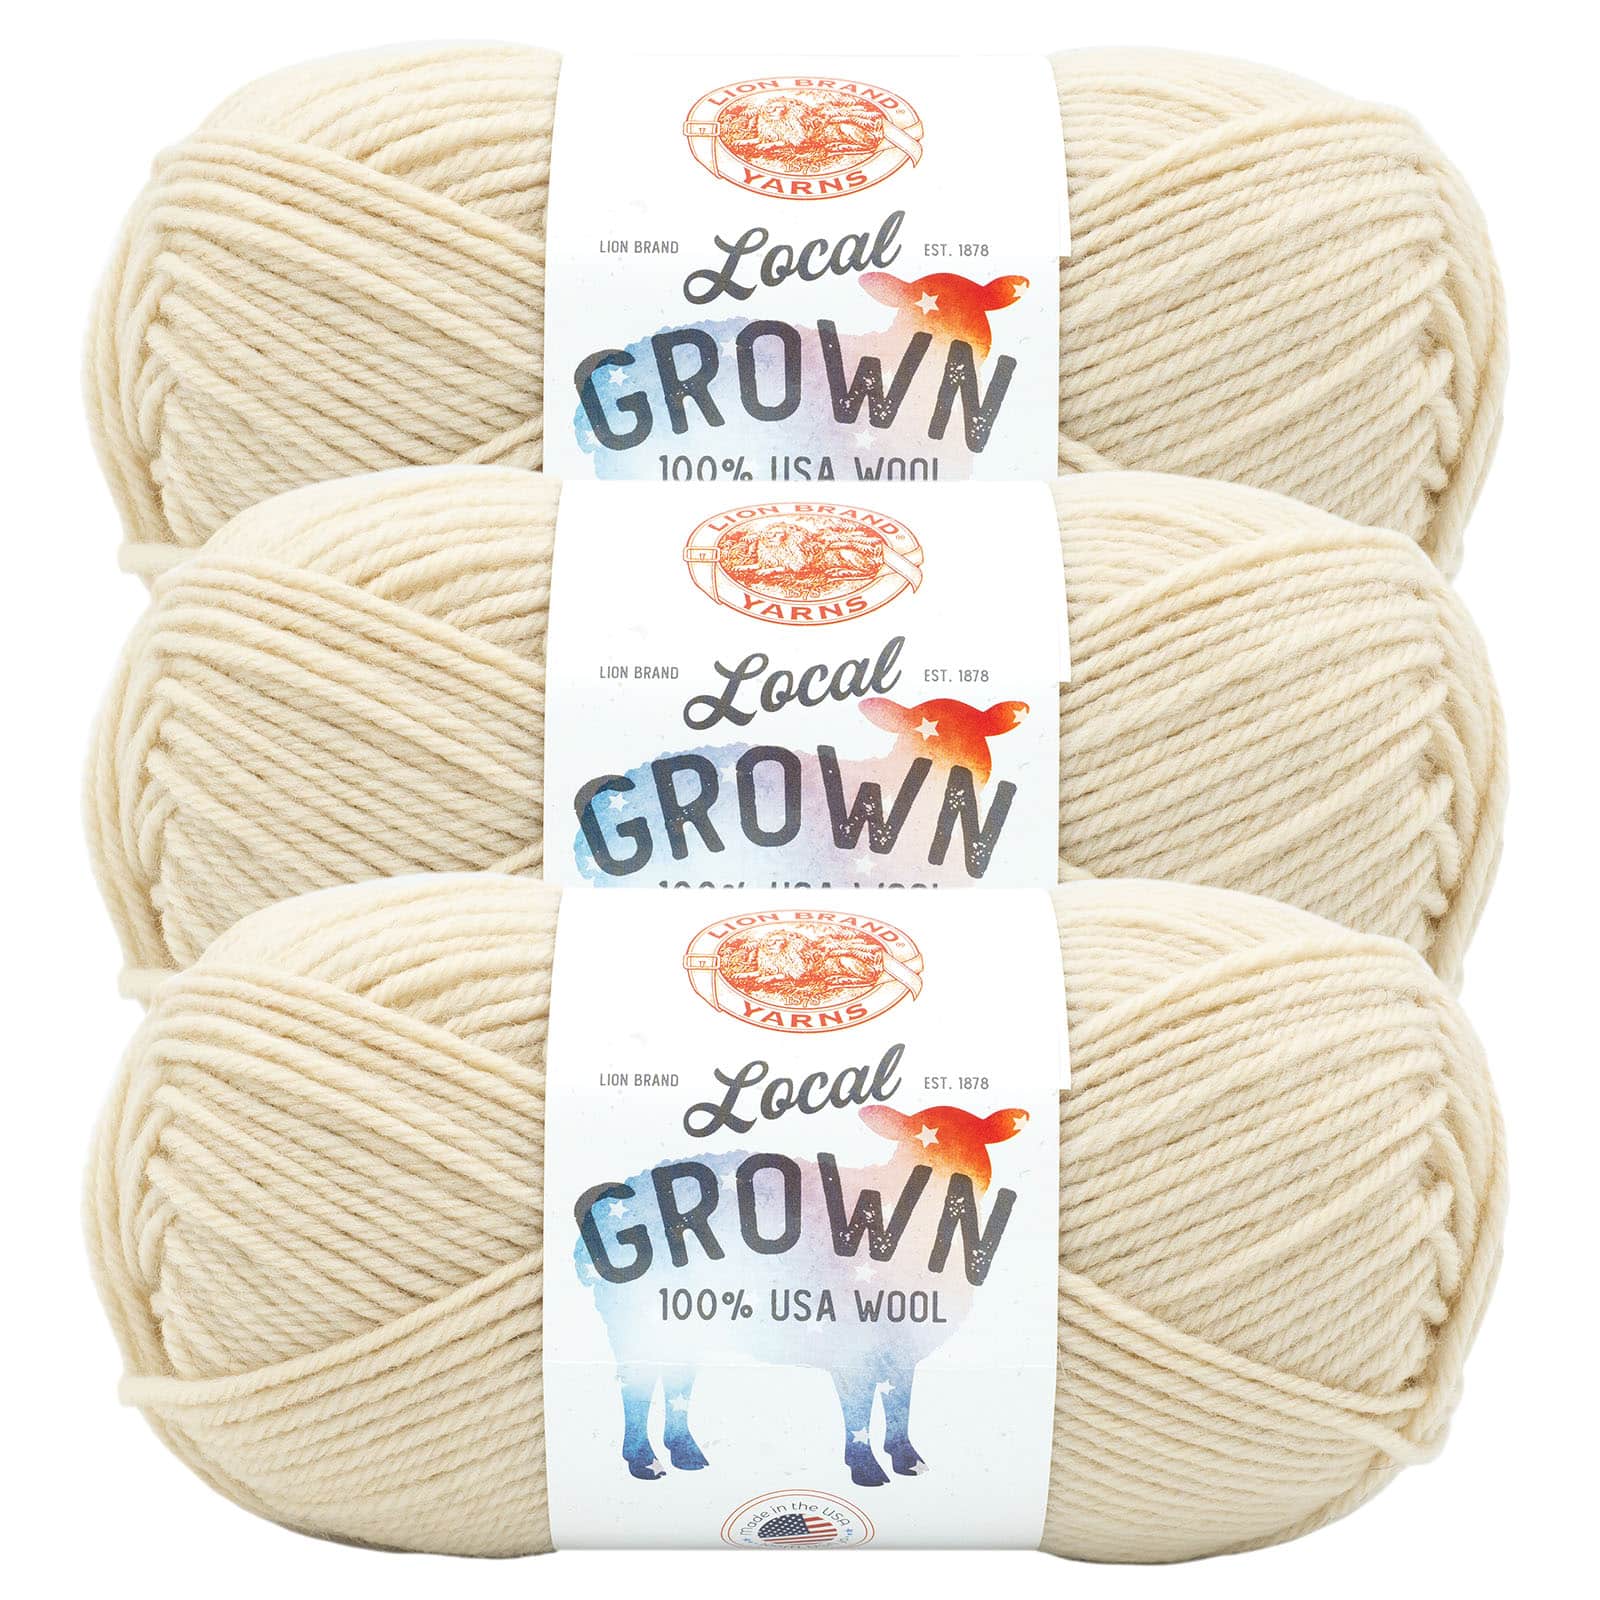 3 Pack Lion Brand® Landscapes® Fusion Yarn